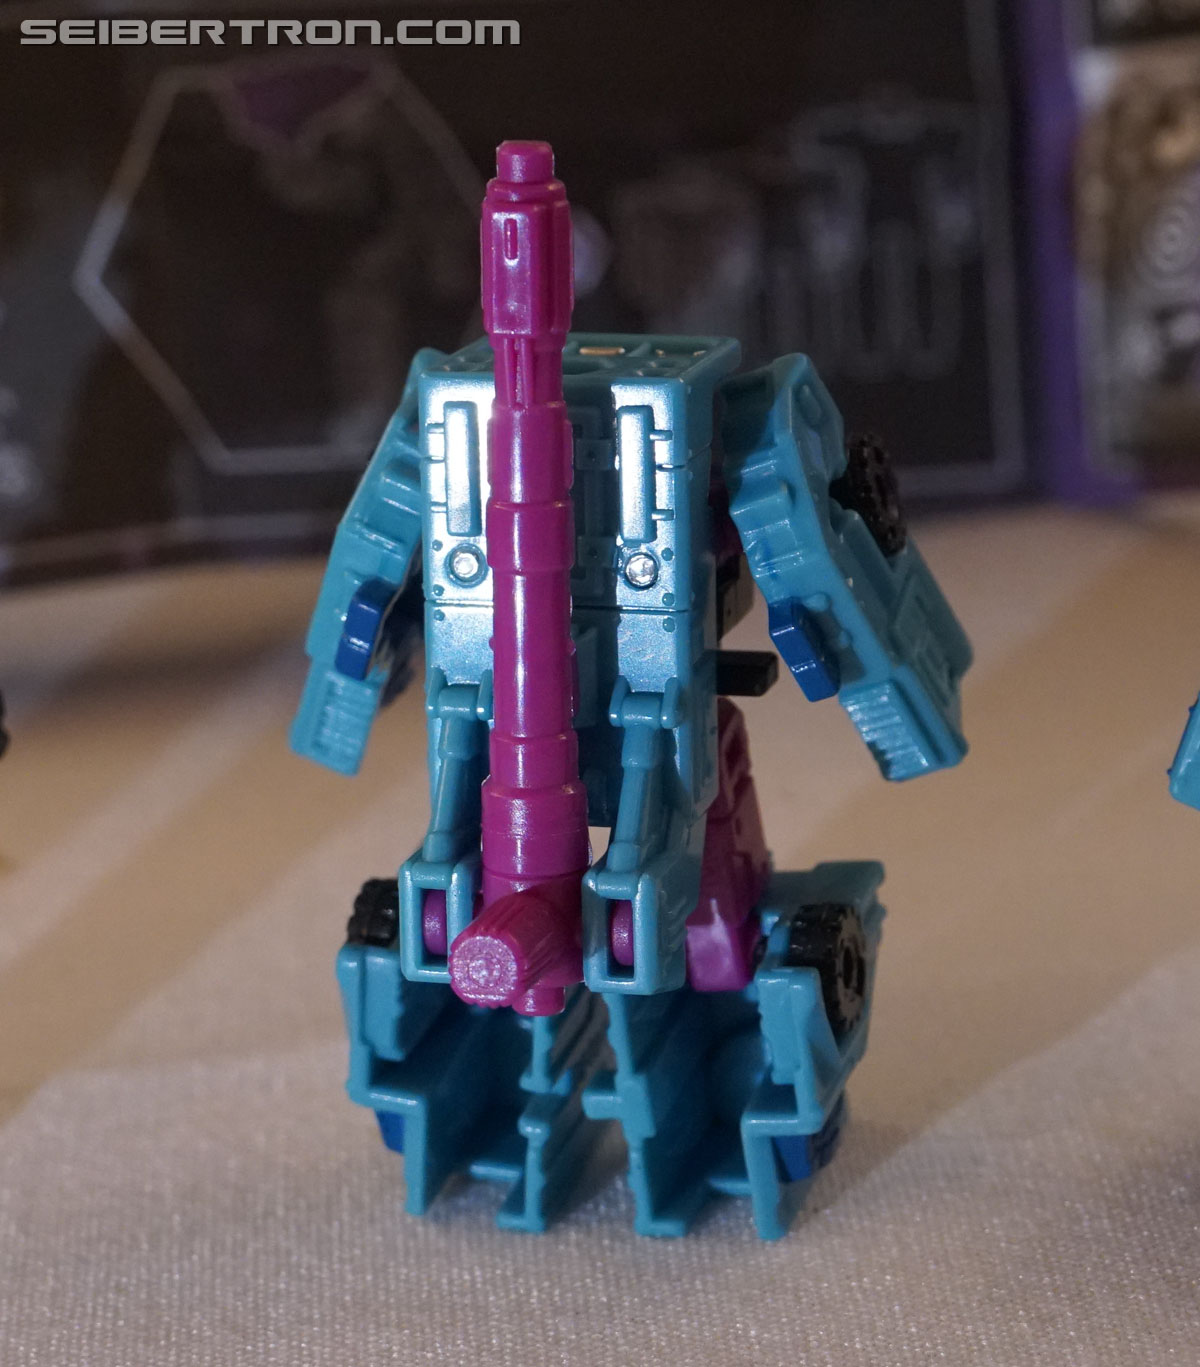 NYCC 2019 - Unboxing of Fall 2019 Transformers WFC SIEGE products